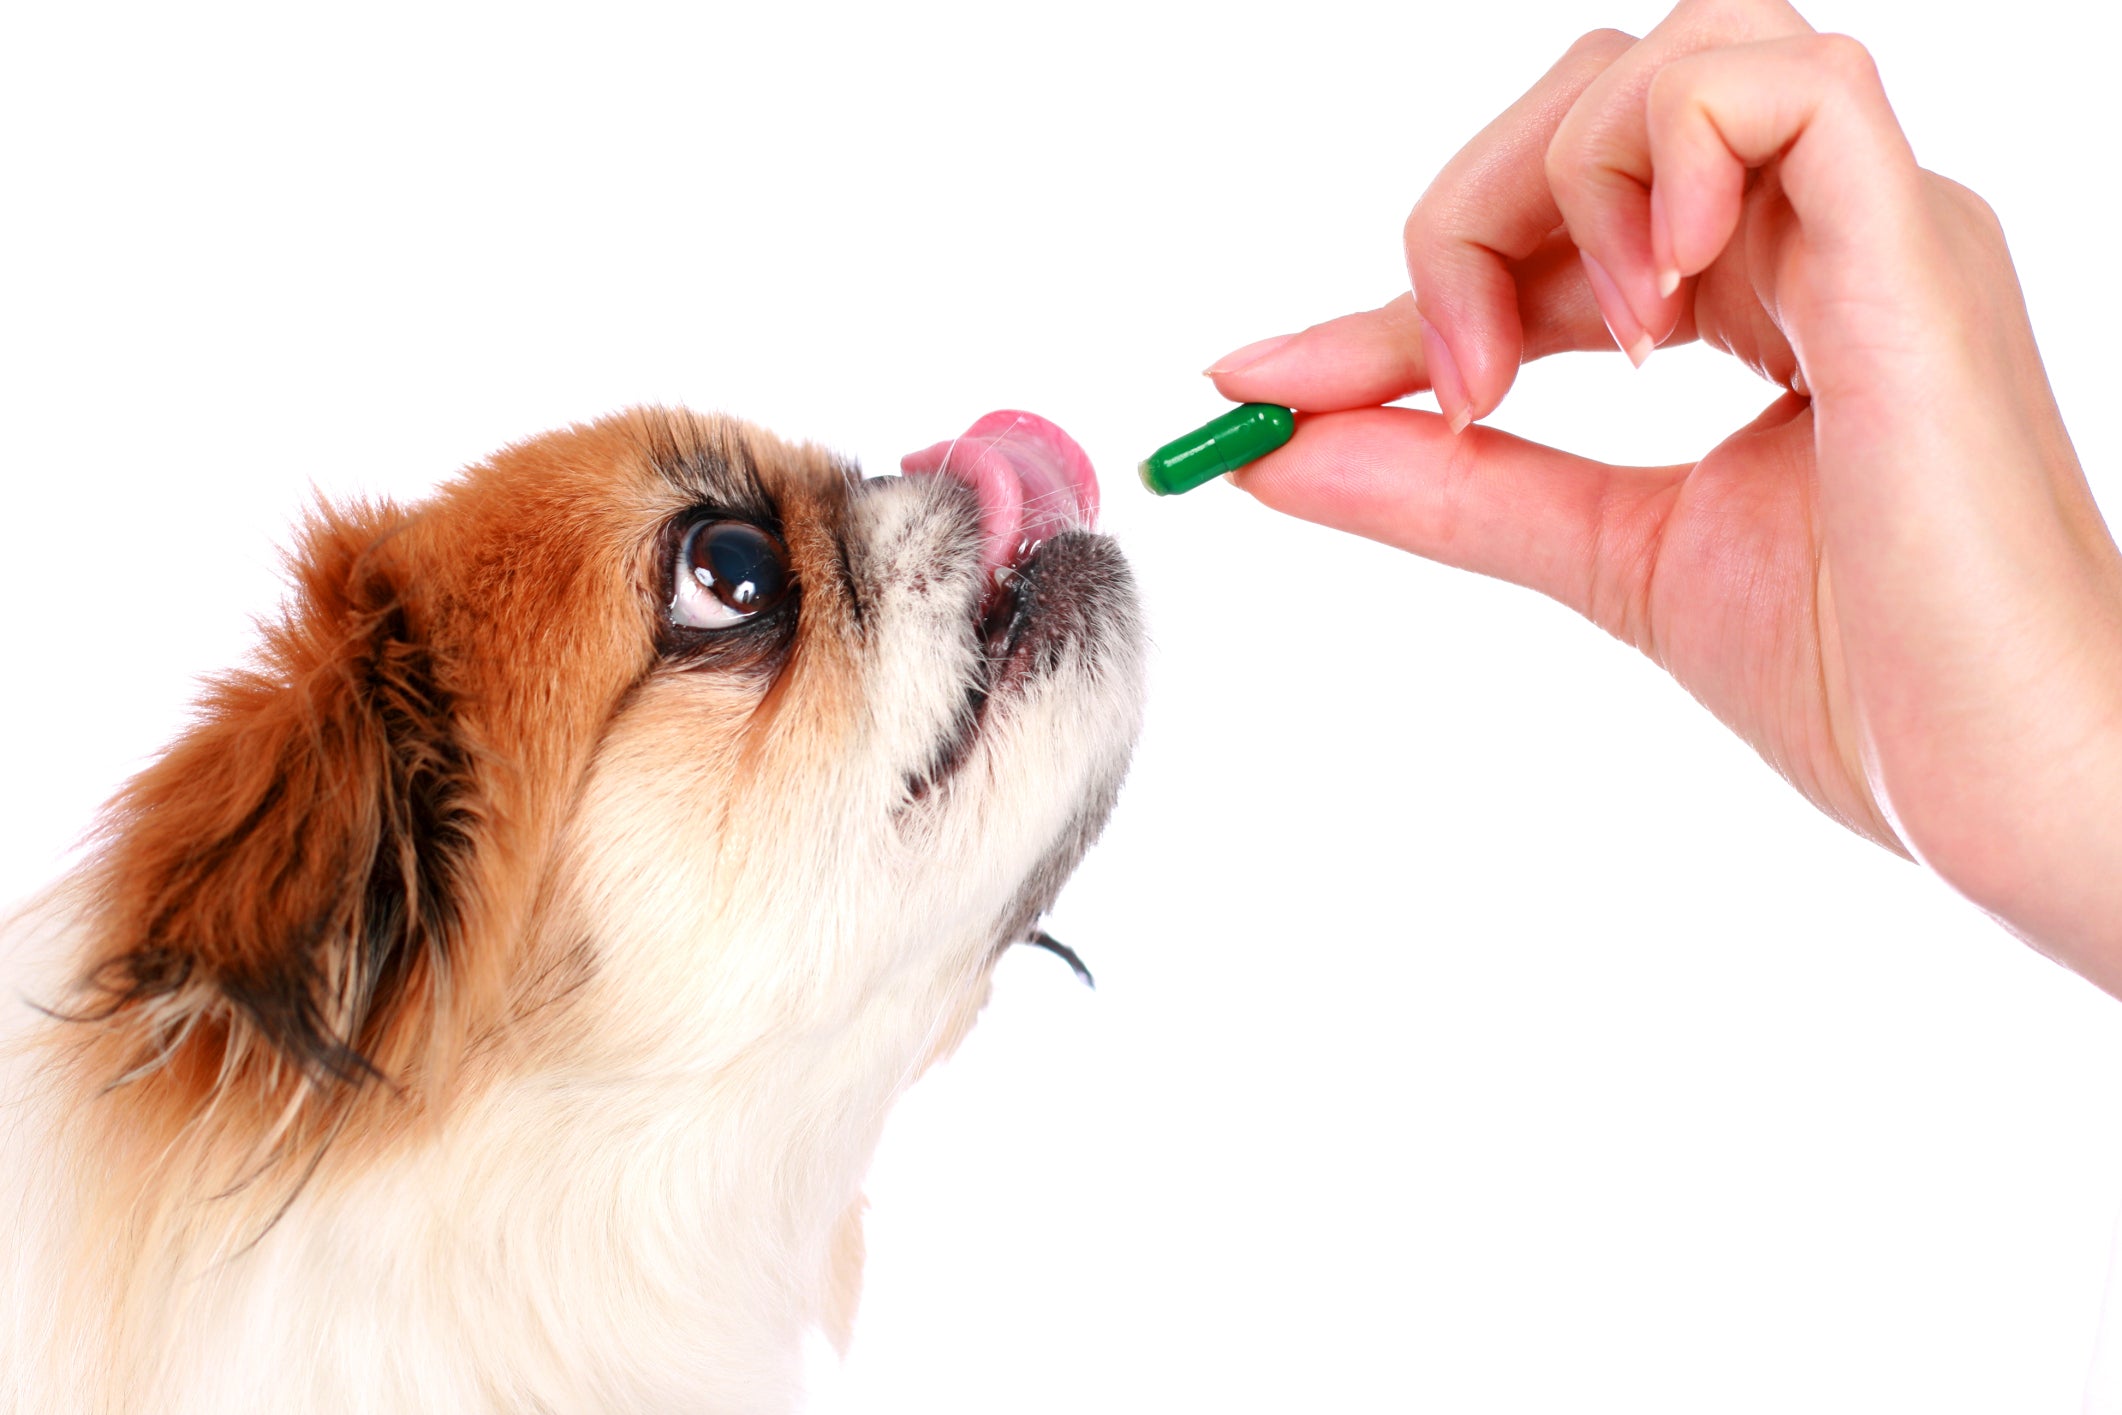 Easy Ways to Give Medication to Your Dog